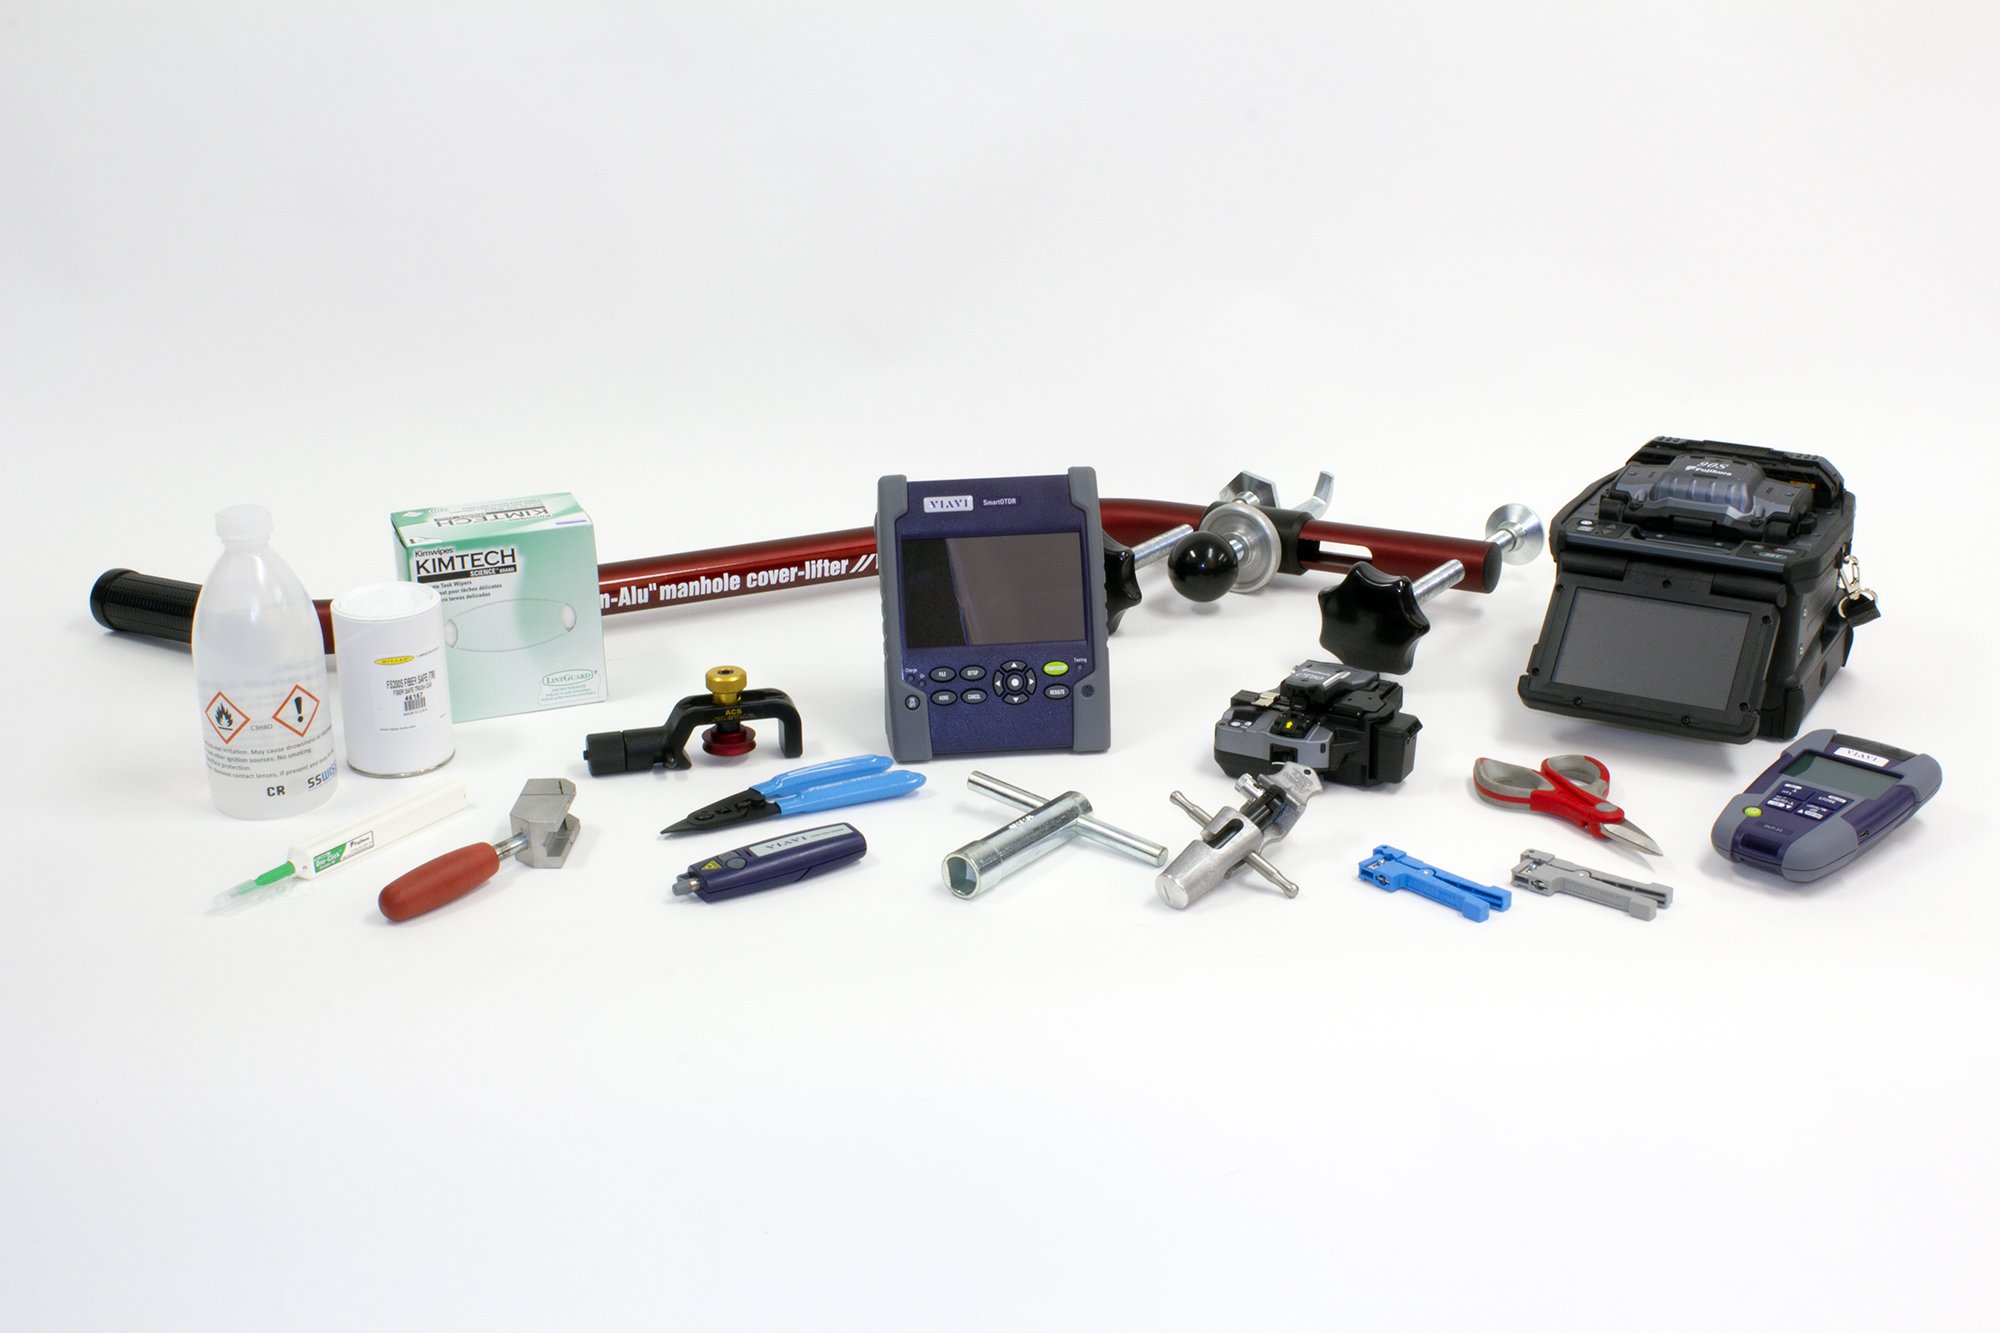 Kit for splicing and assembly of OFP's